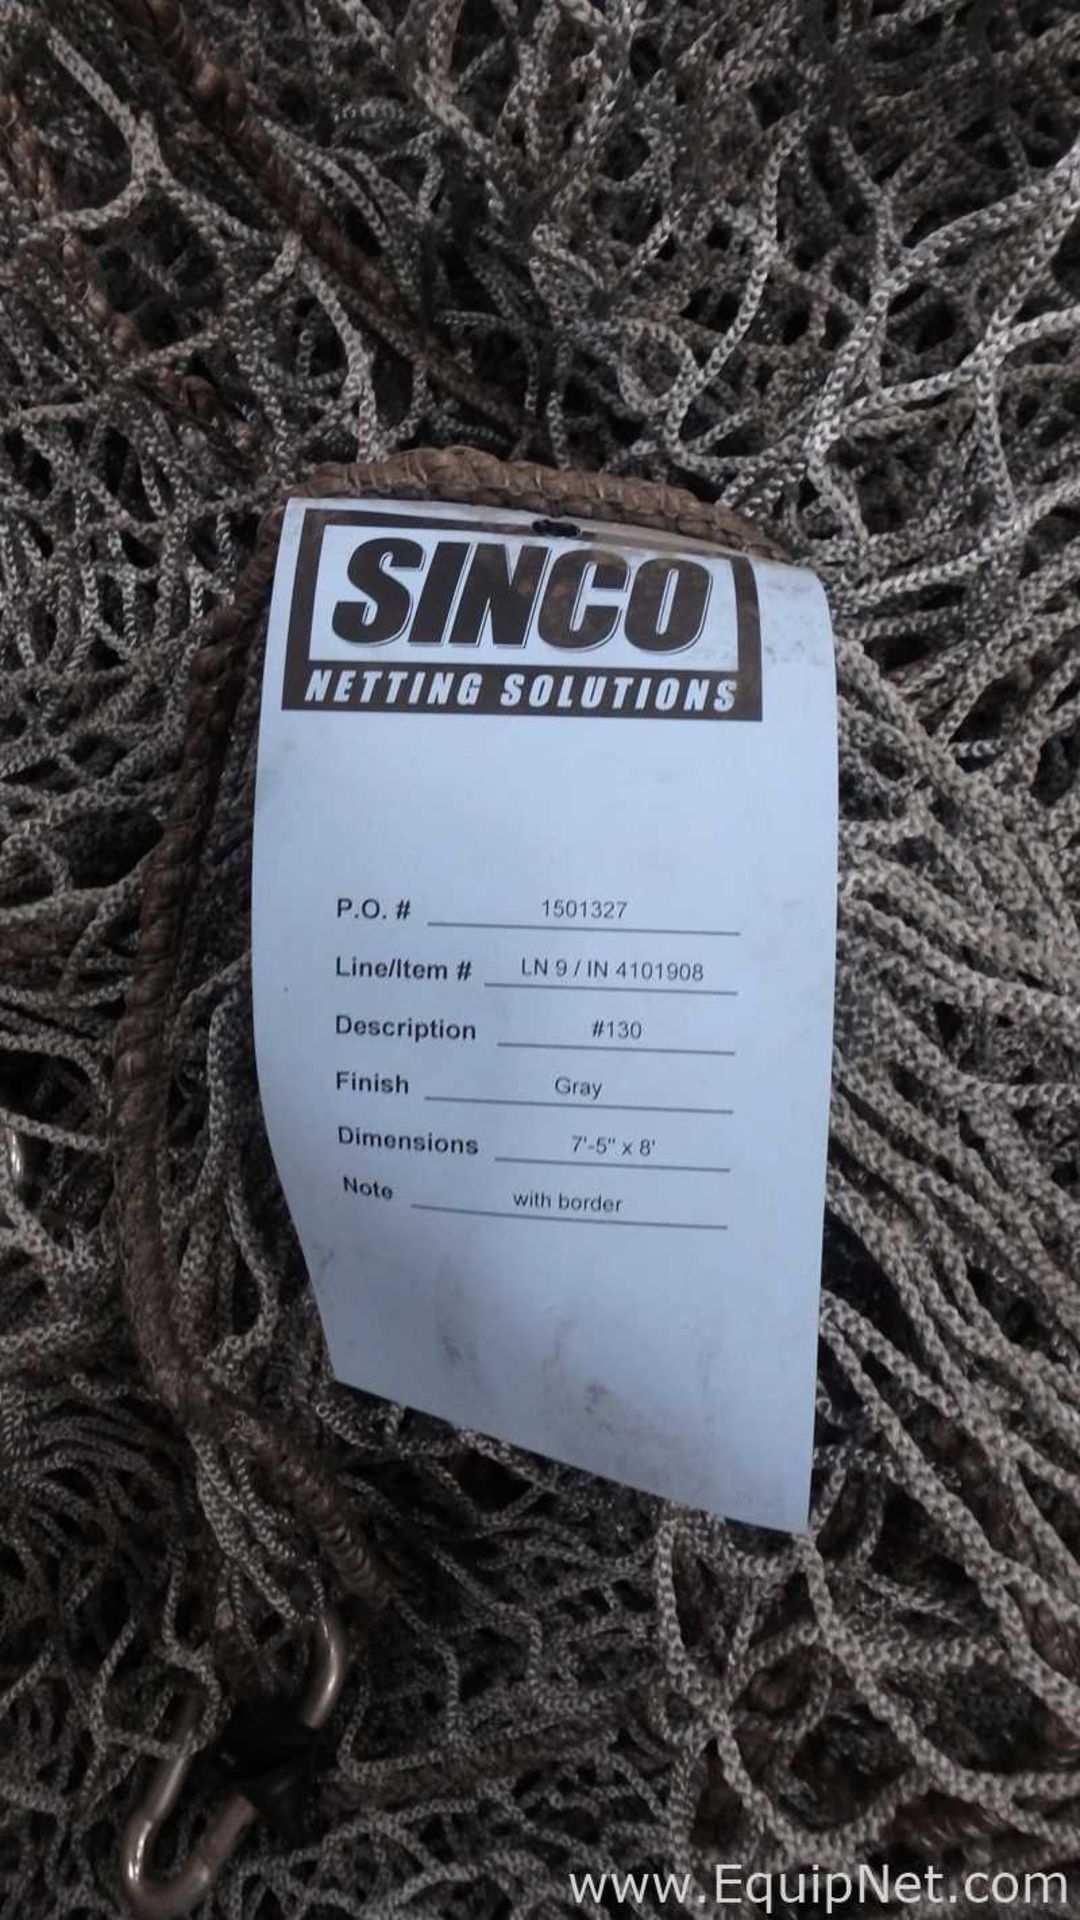 Lot of 1 Net Box Sinco Netting Solutions line/Item LN9/IN 4101908 Description Number 130 - Image 3 of 3